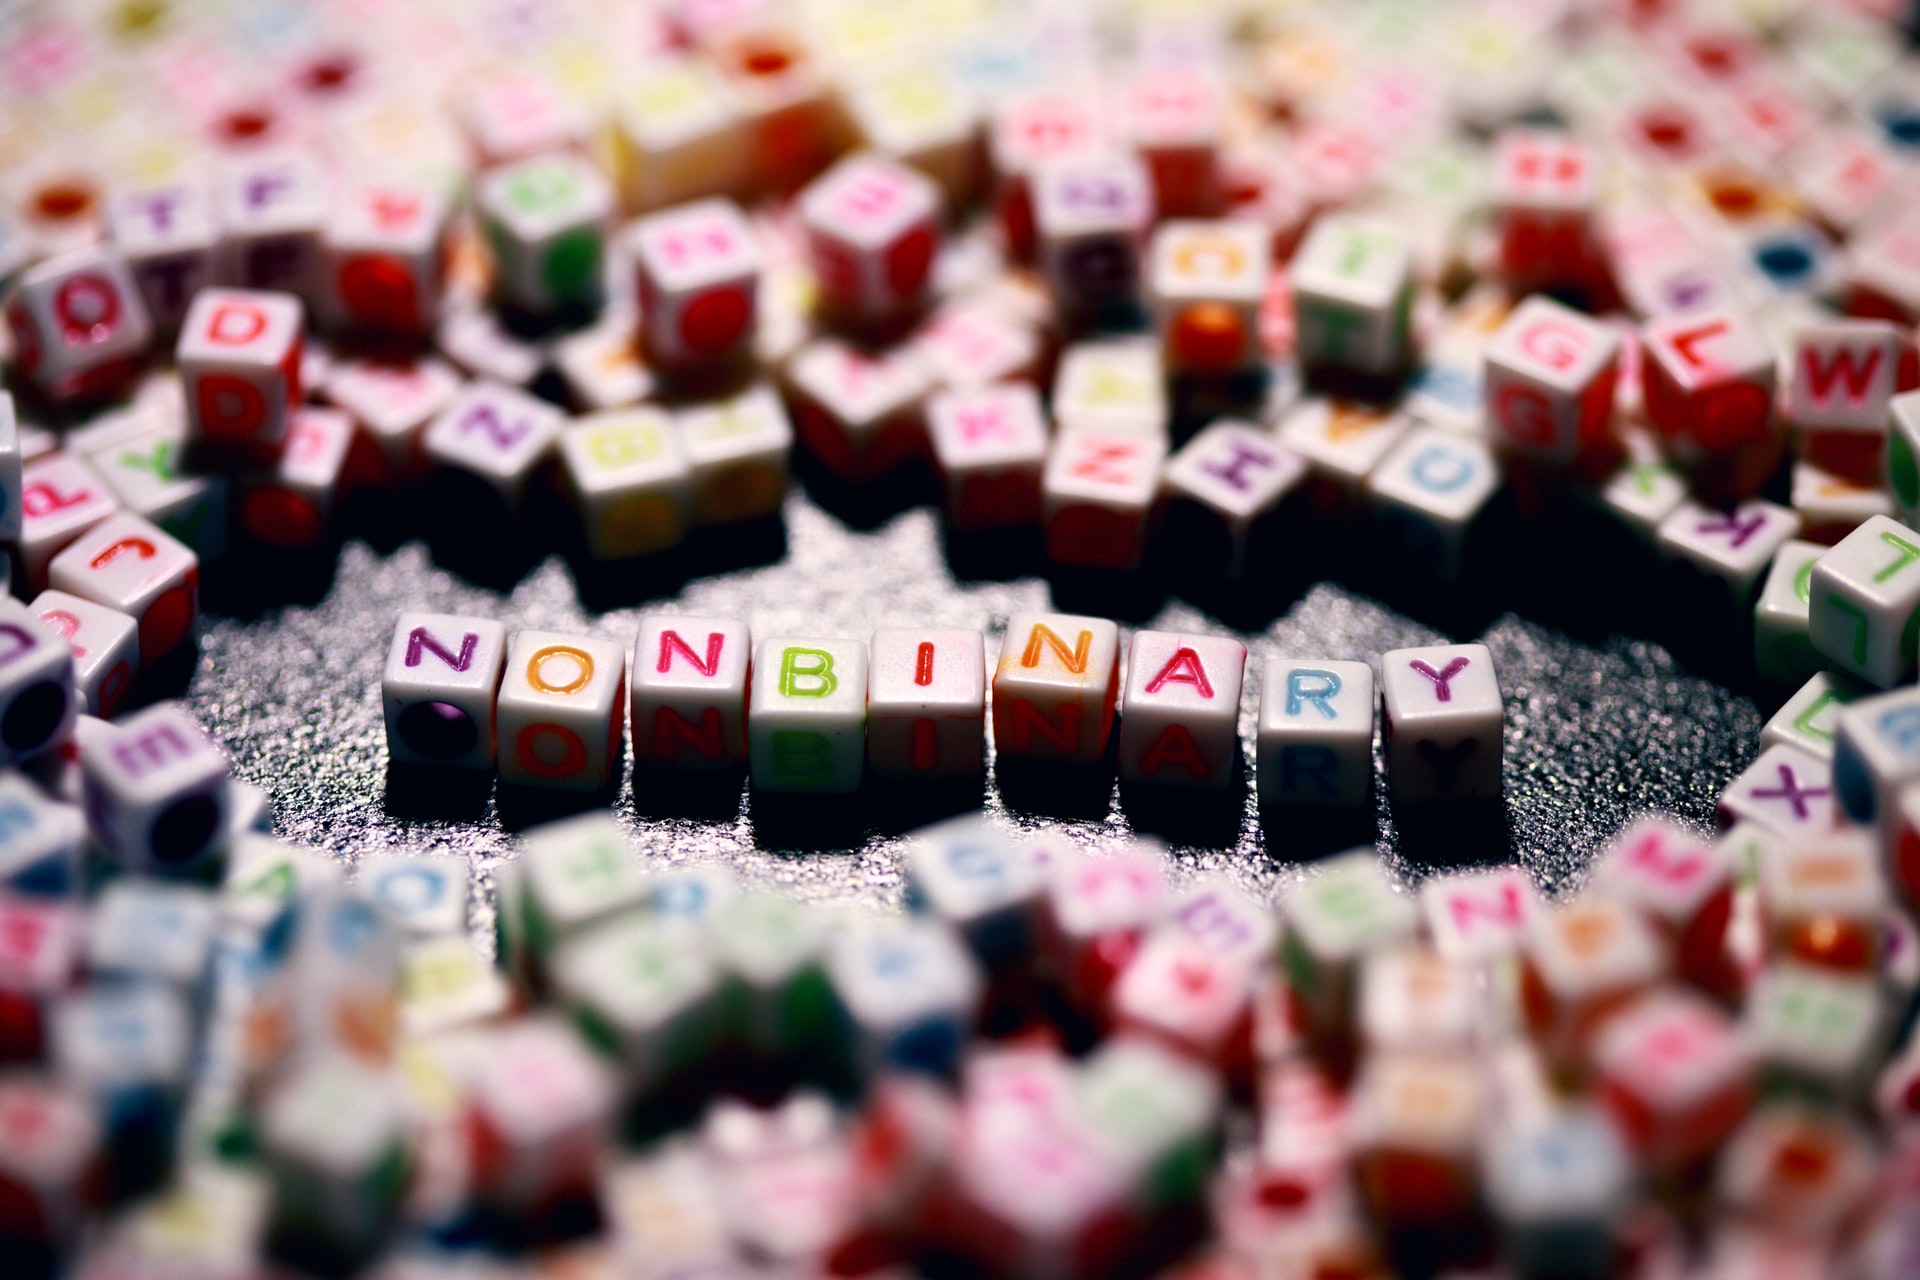 Nonbinary letters image